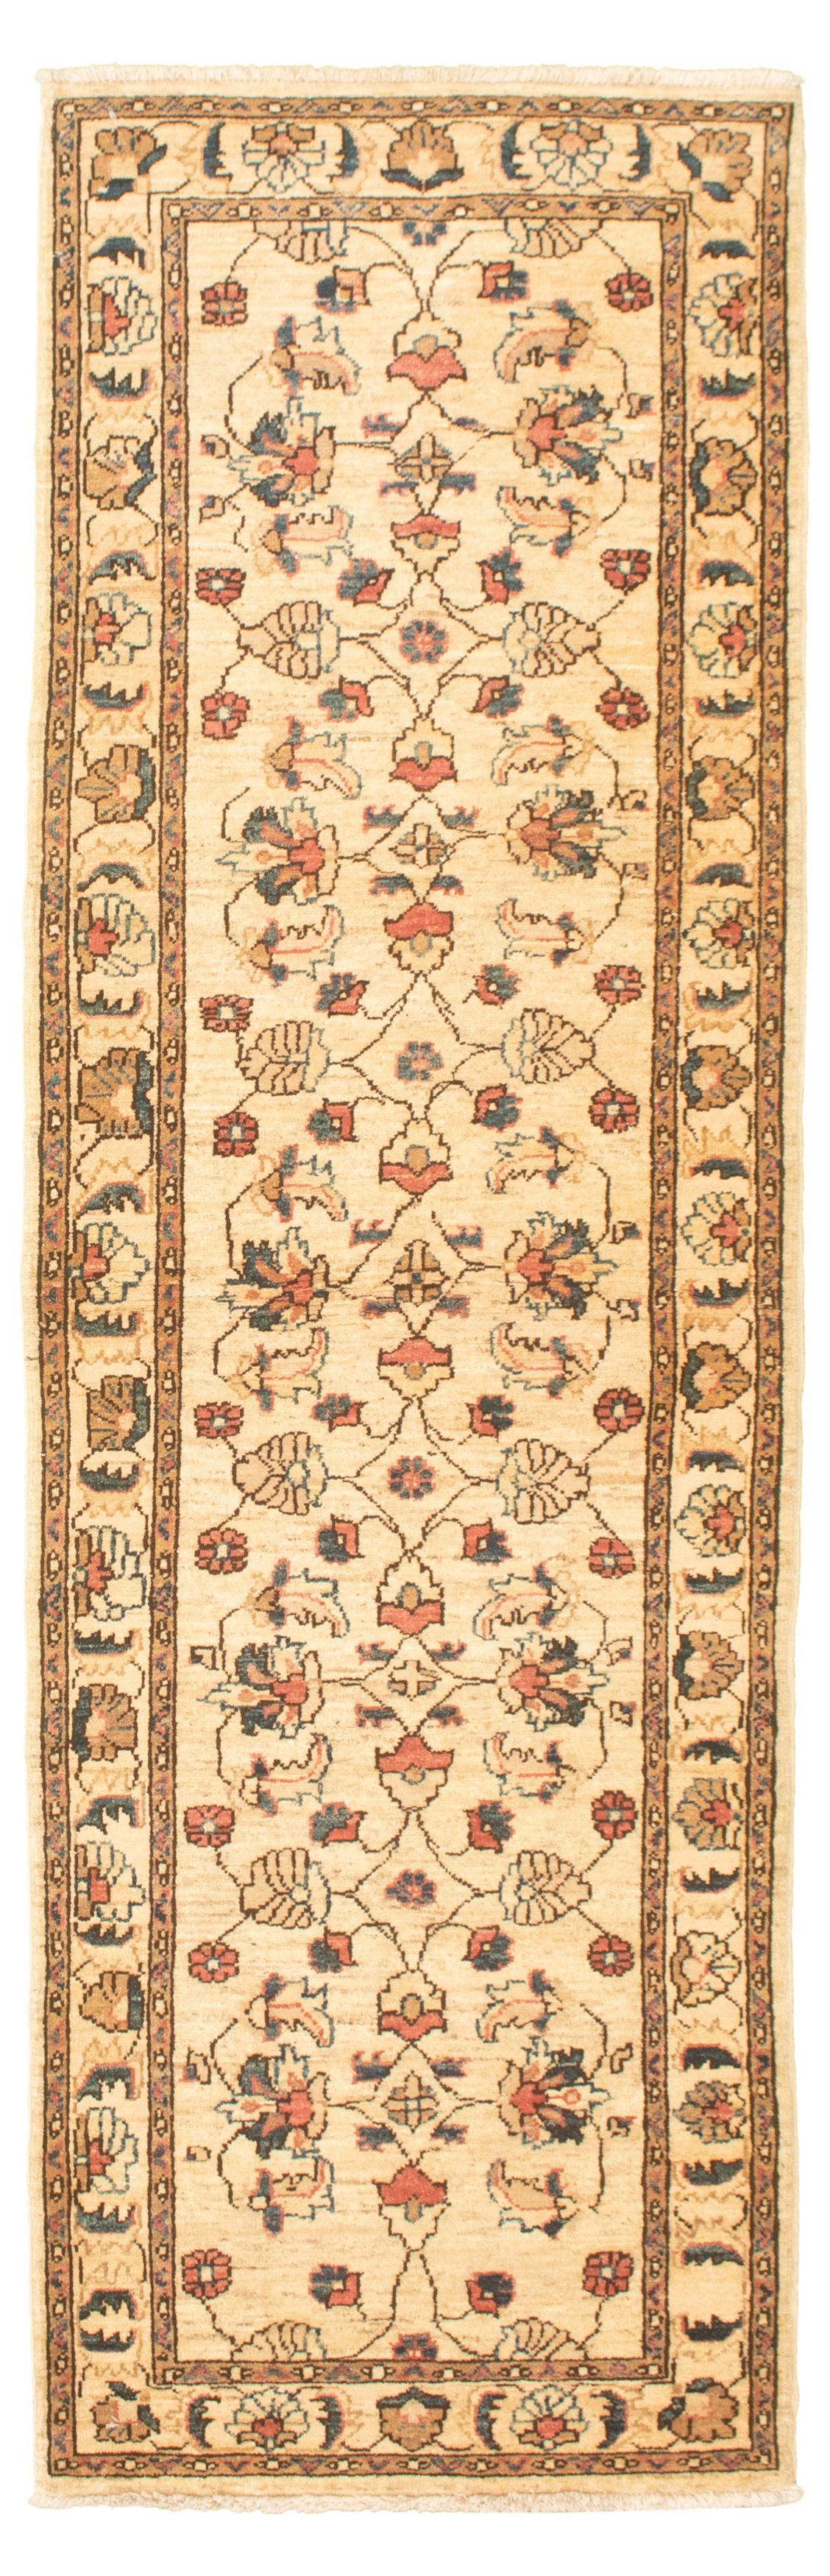 Hand-knotted Chobi Finest Cream Wool Rug 2'7" x 10'2" Size: 2'7" x 10'2"  